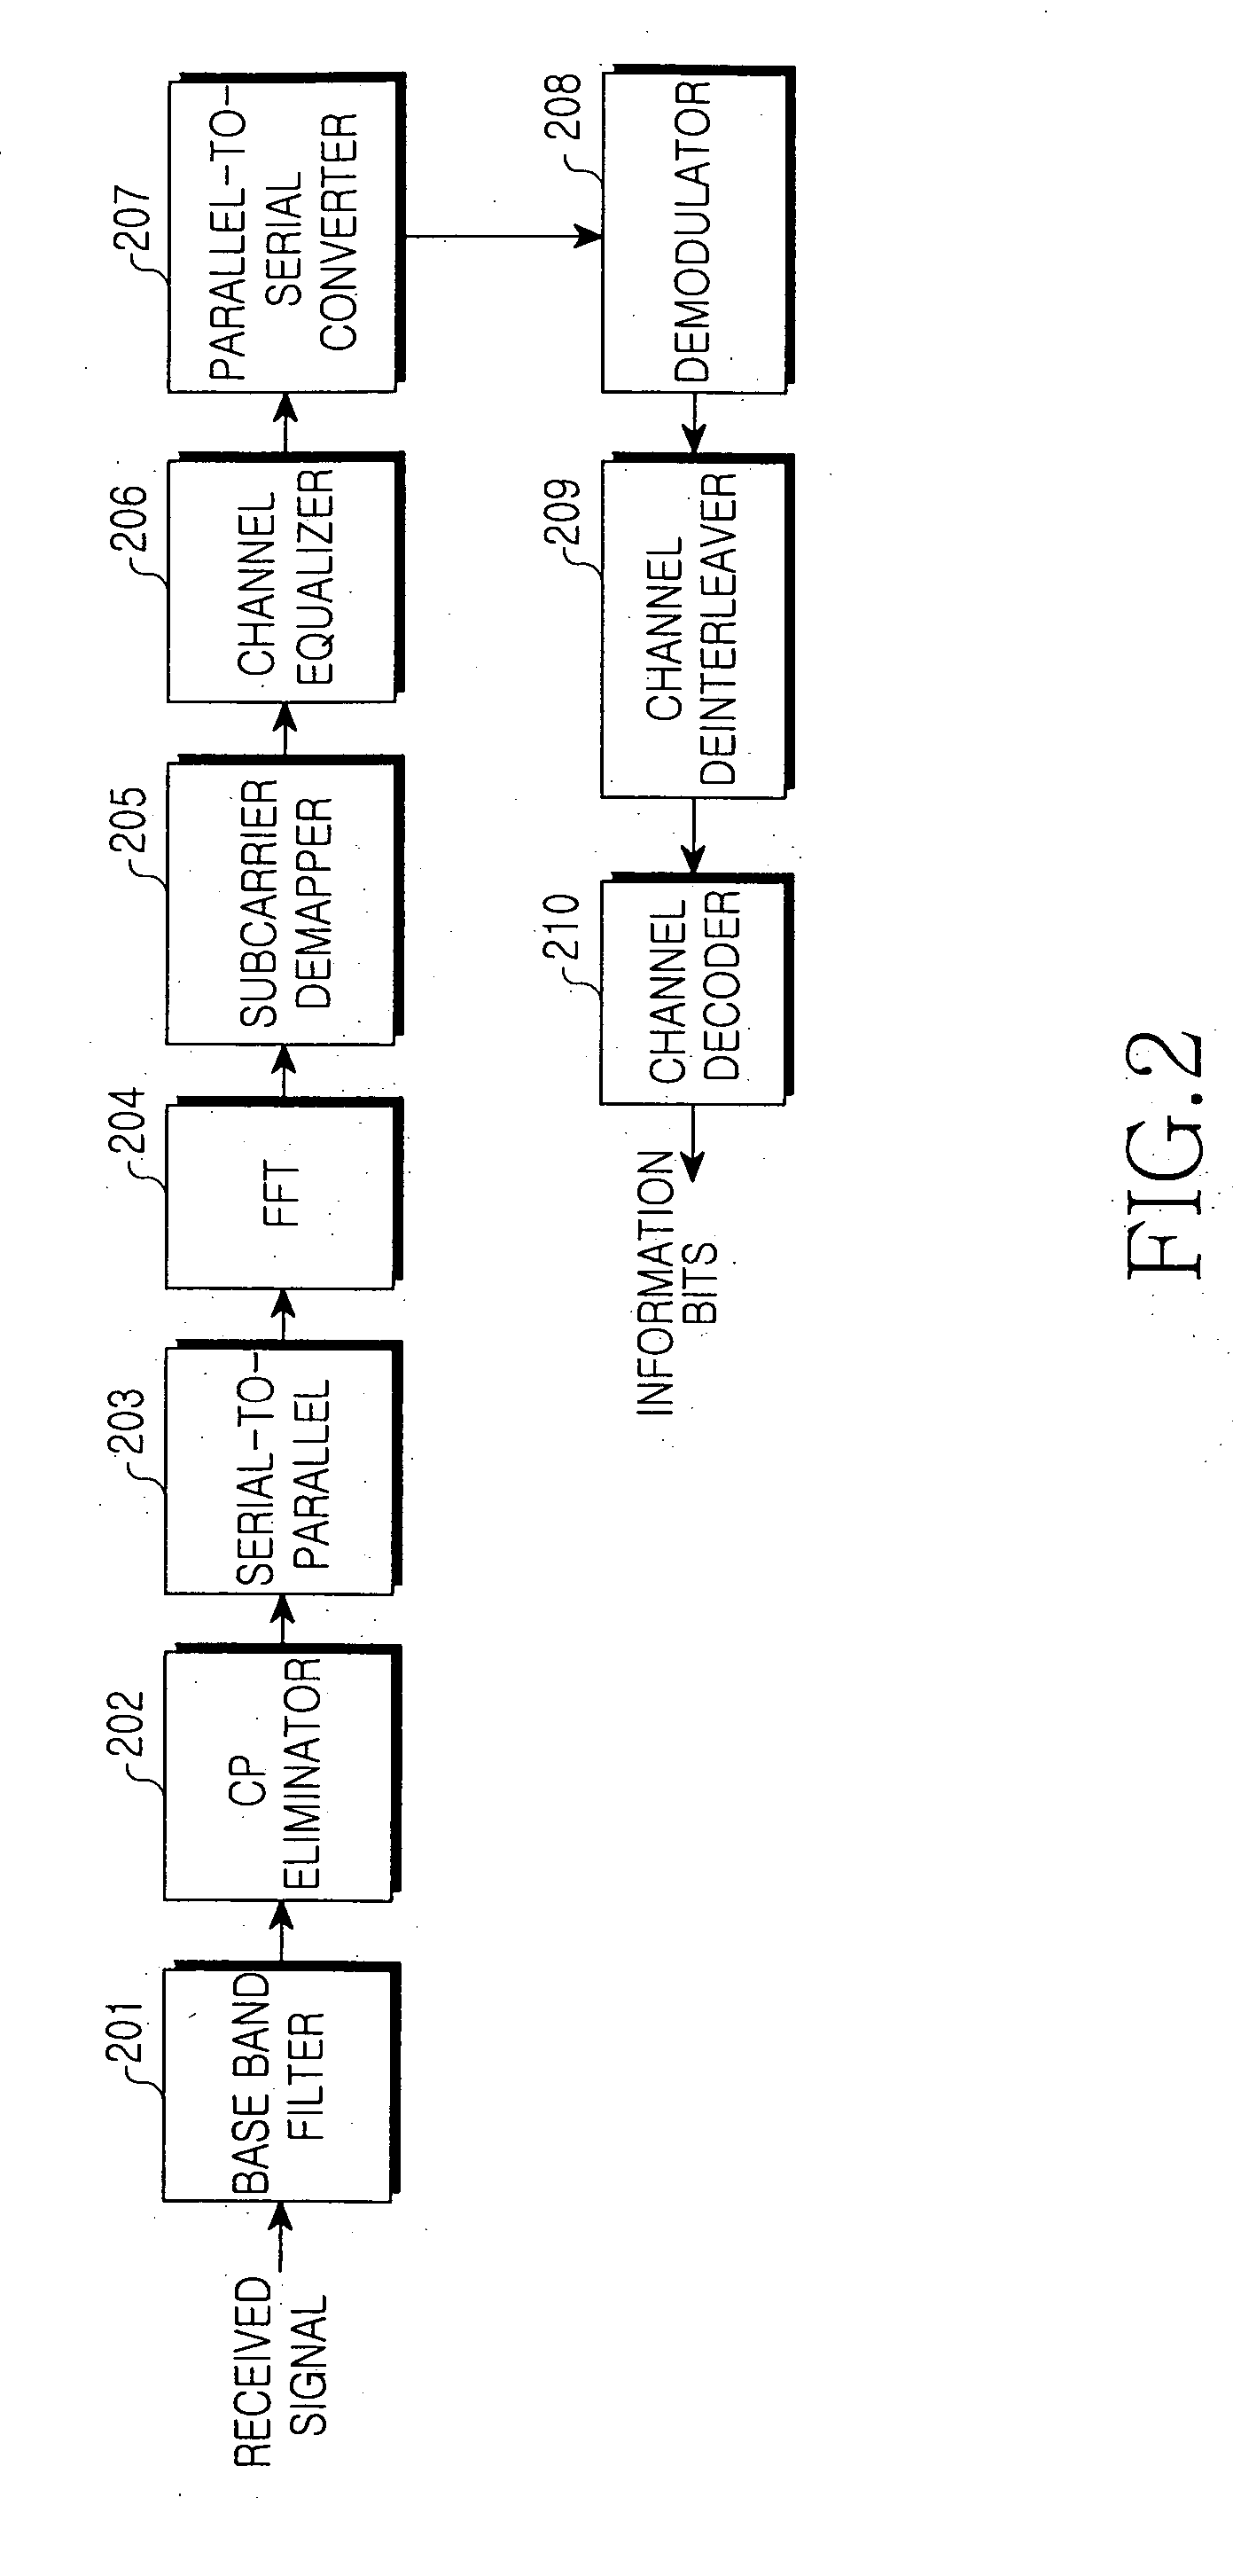 Apparatus and method for channel selective scheduling in mobile communication systems using OFDMA